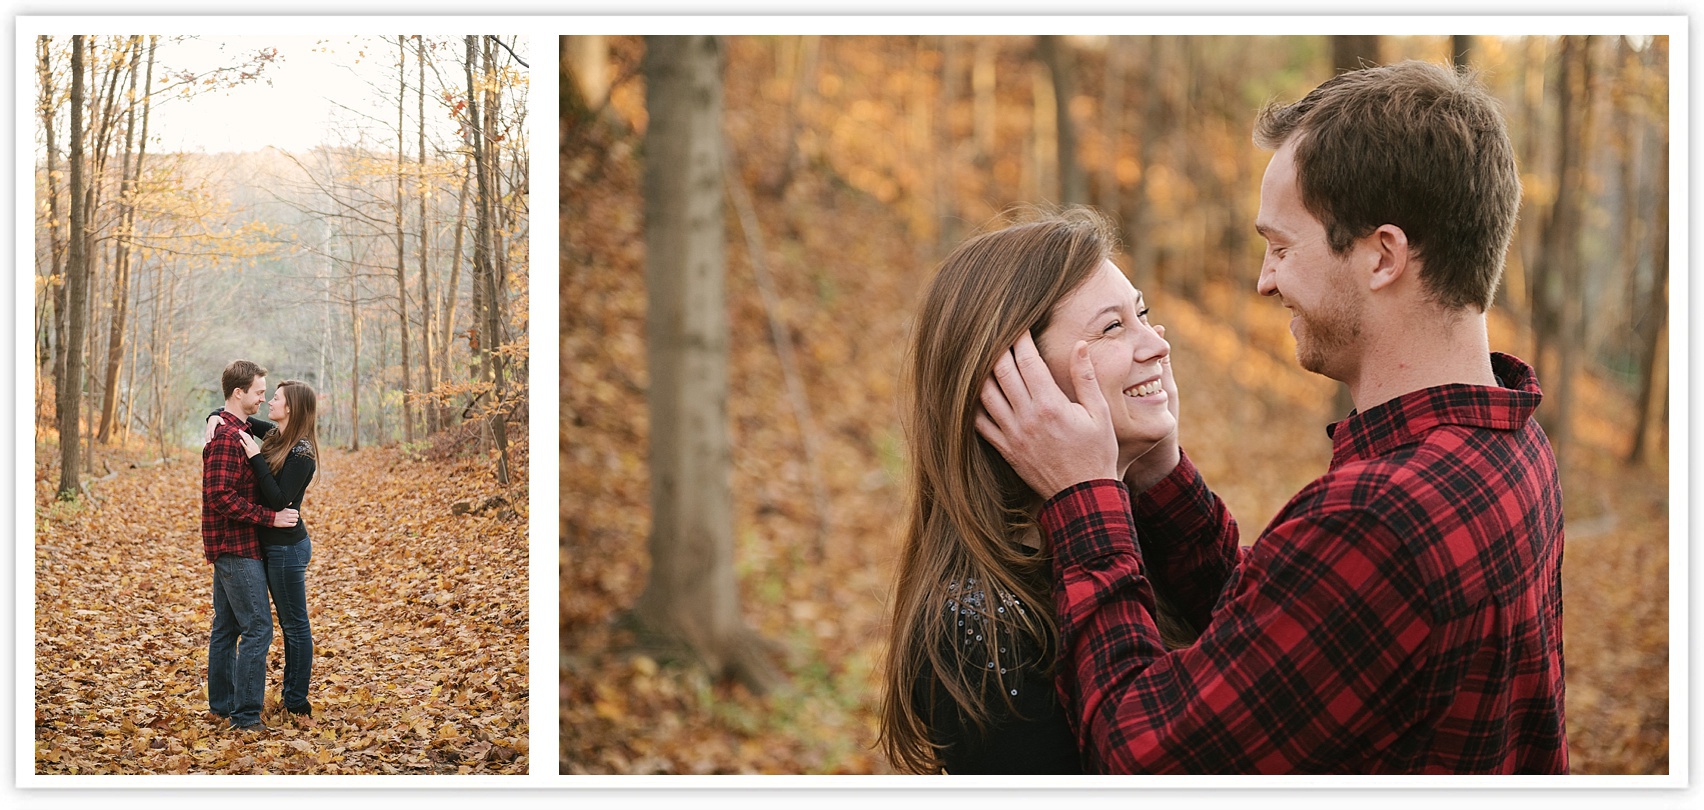 Lincoln Brick Park engagement photos in Grand Ledge, Michigan by Allie and Co. Photographers